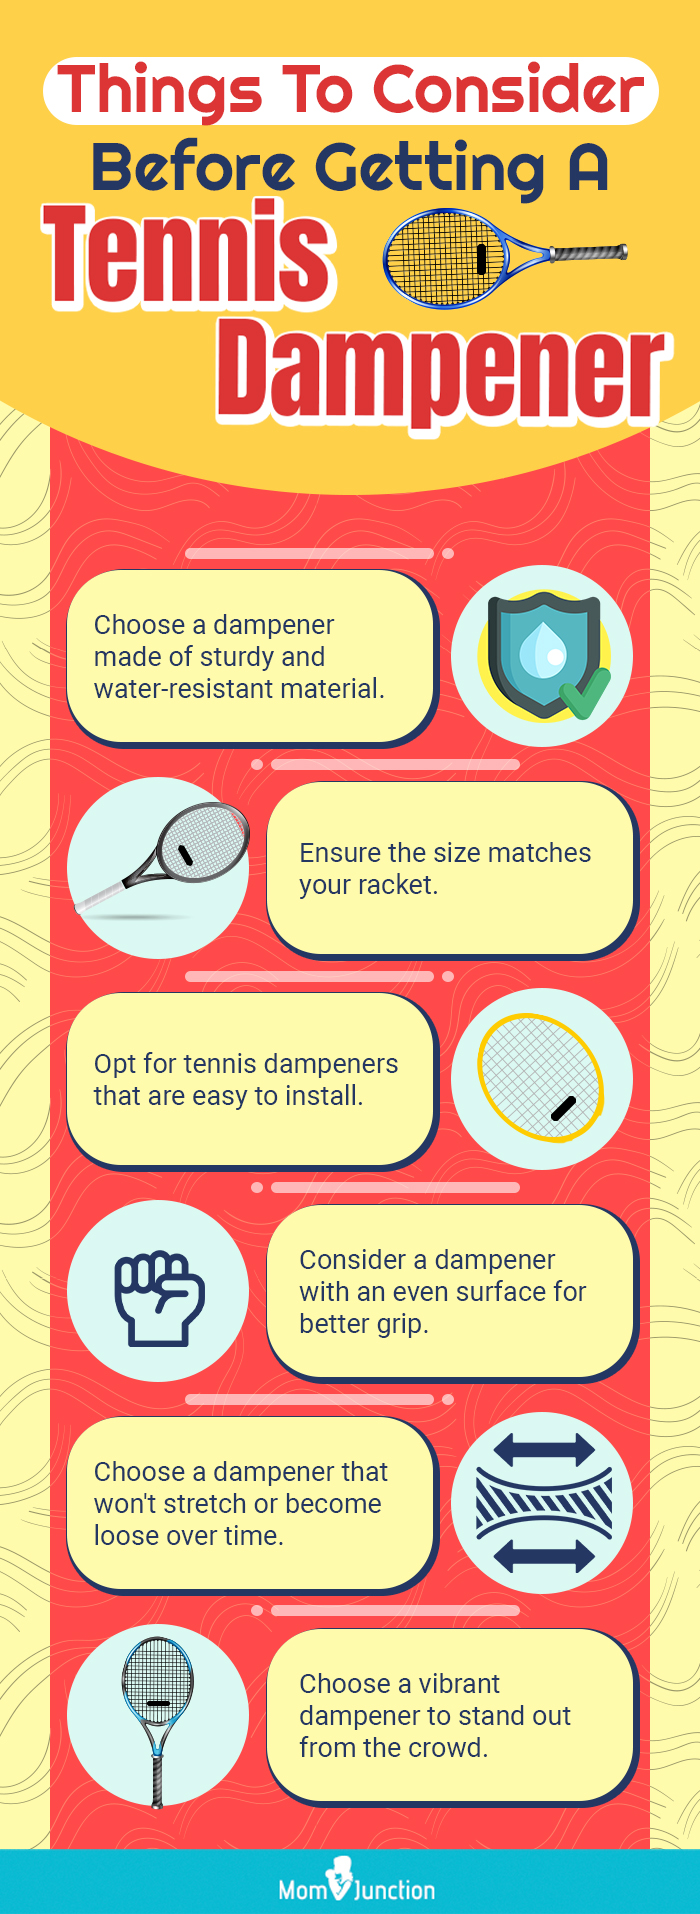 Things To Consider Before Getting A Tennis Dampener